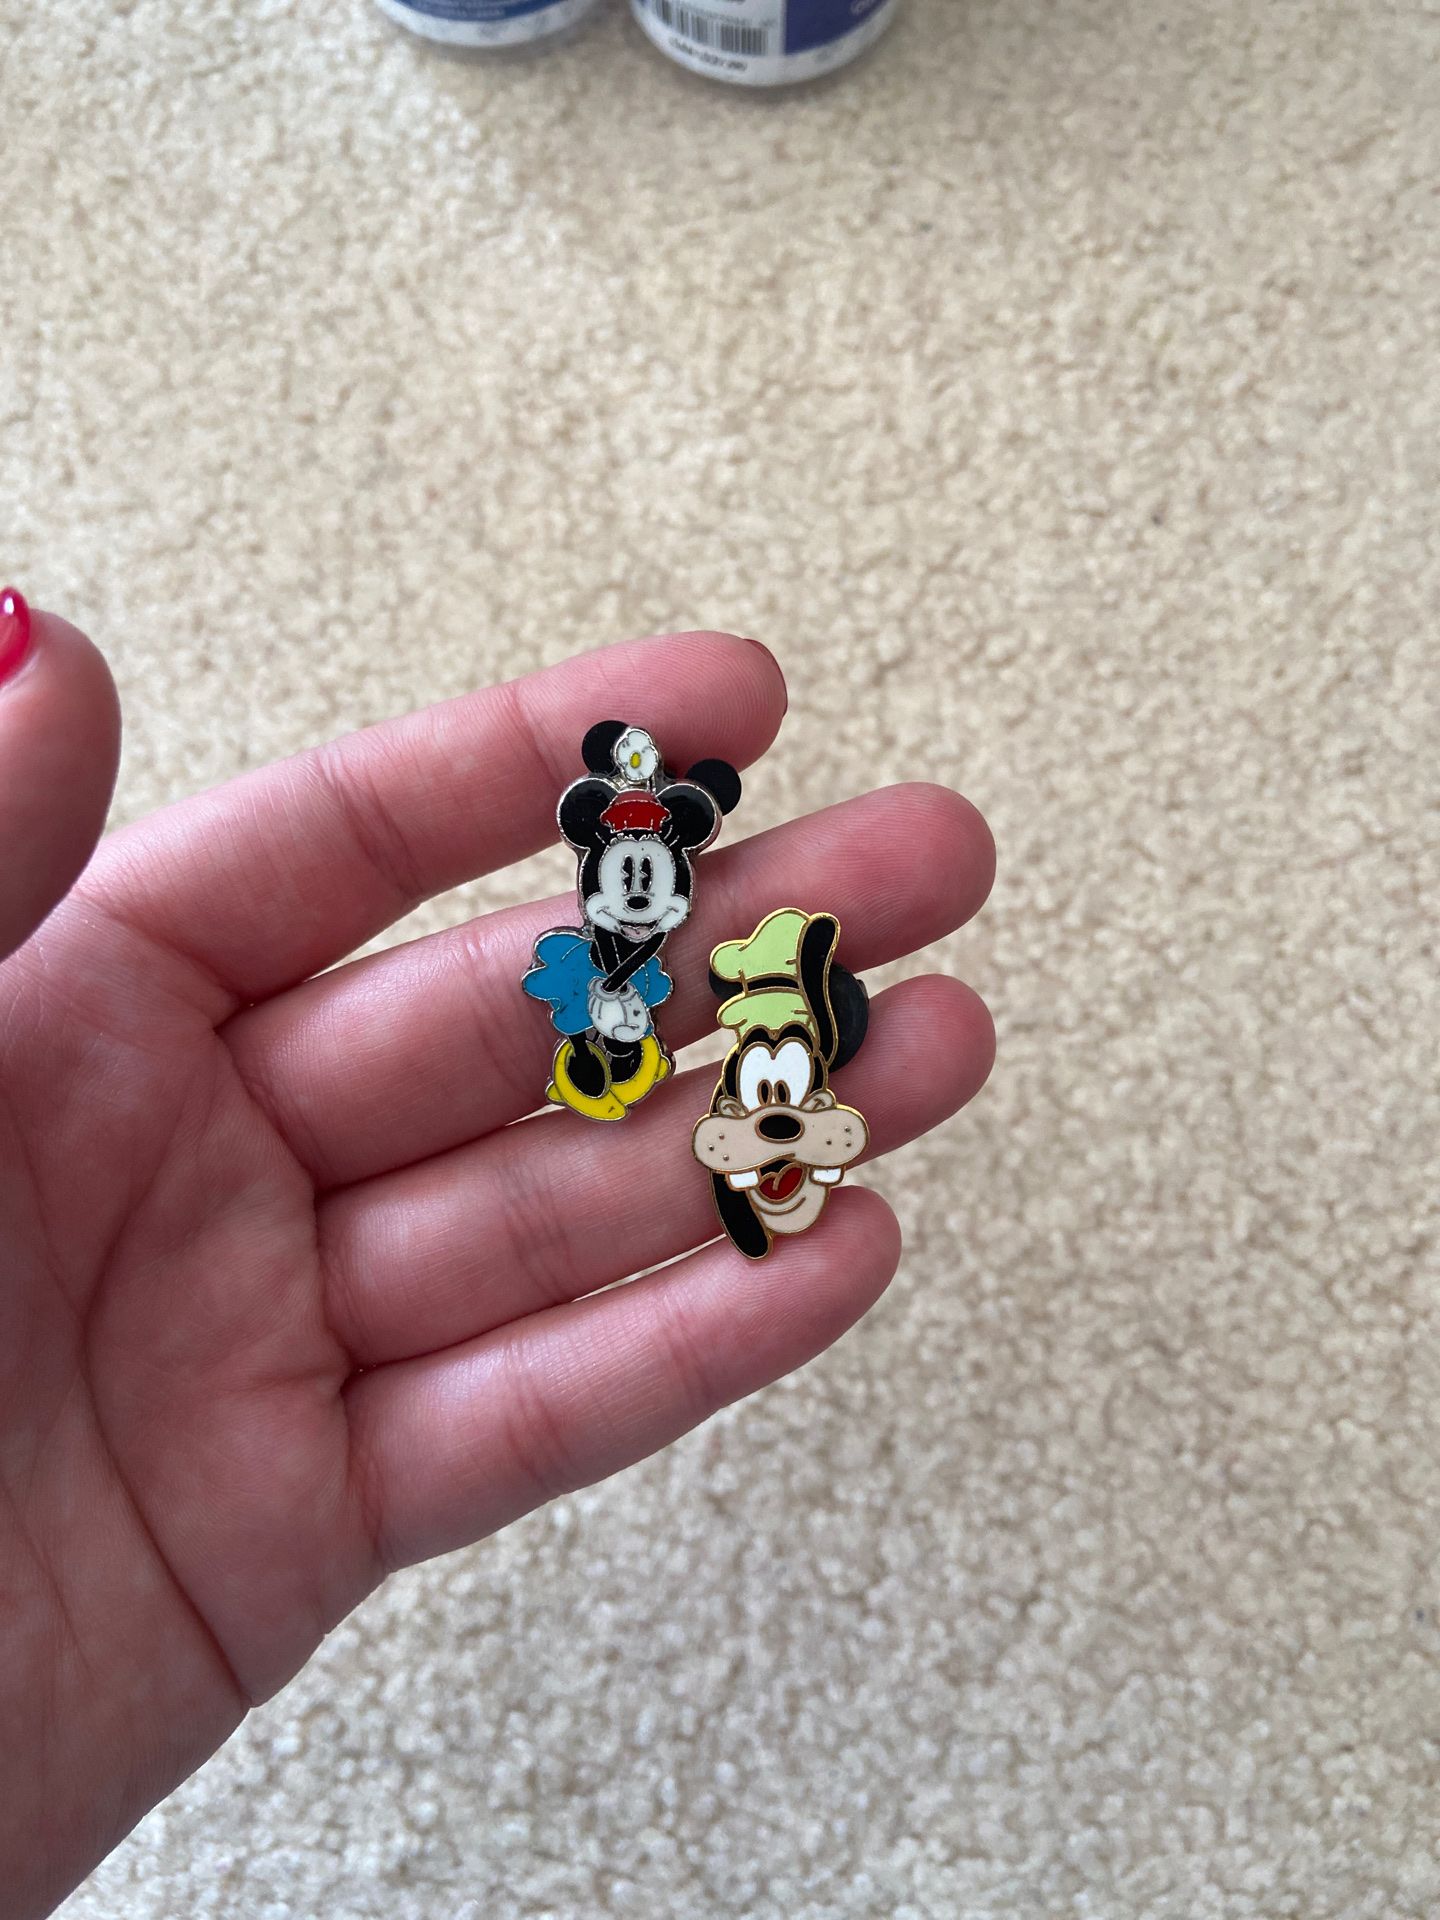 Minnie and goofy authentic Disney trading pins